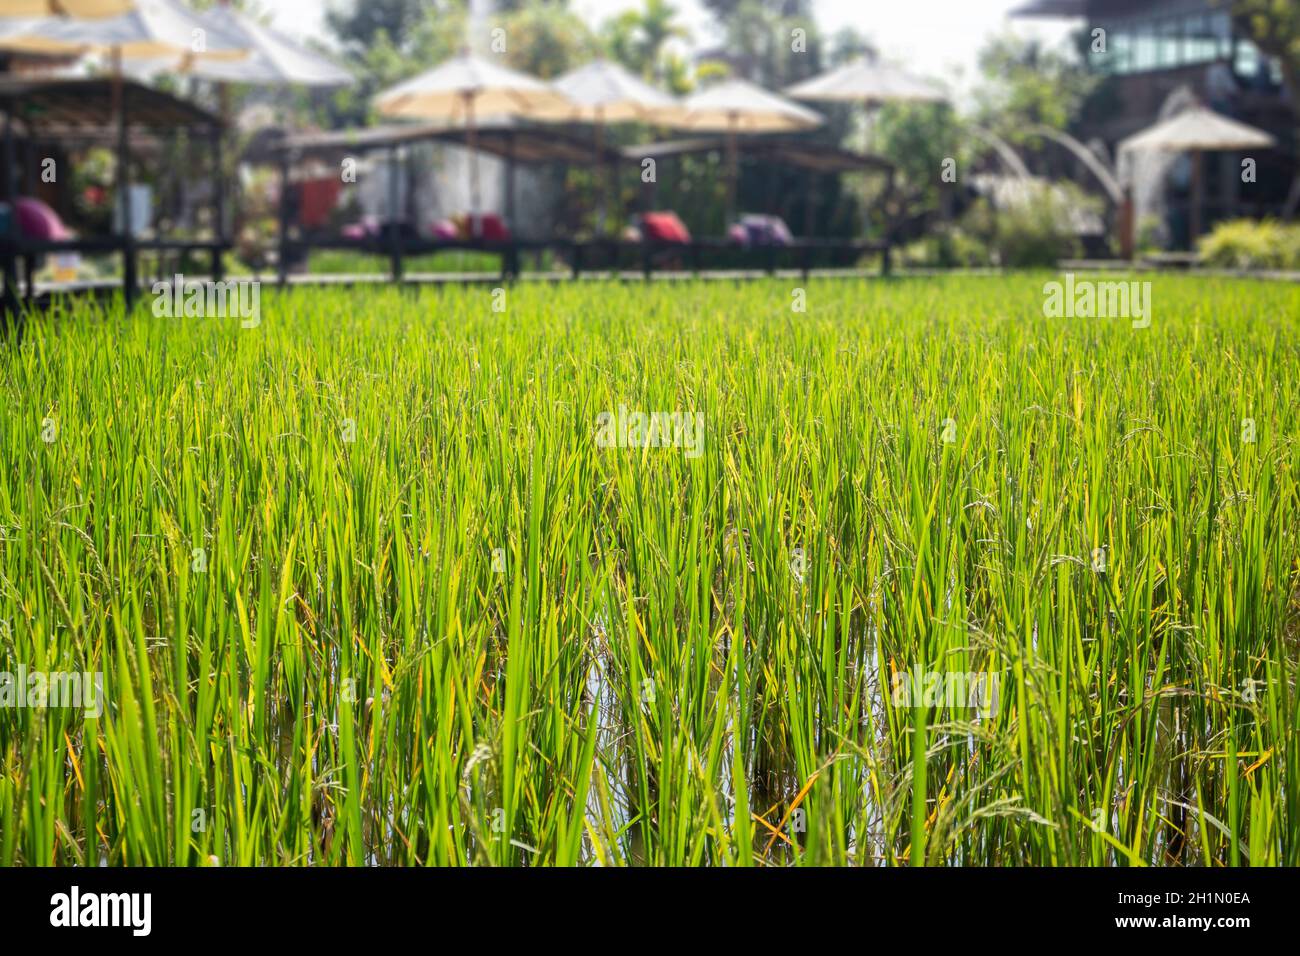 Green rice field relax in summer, stock photo Stock Photo